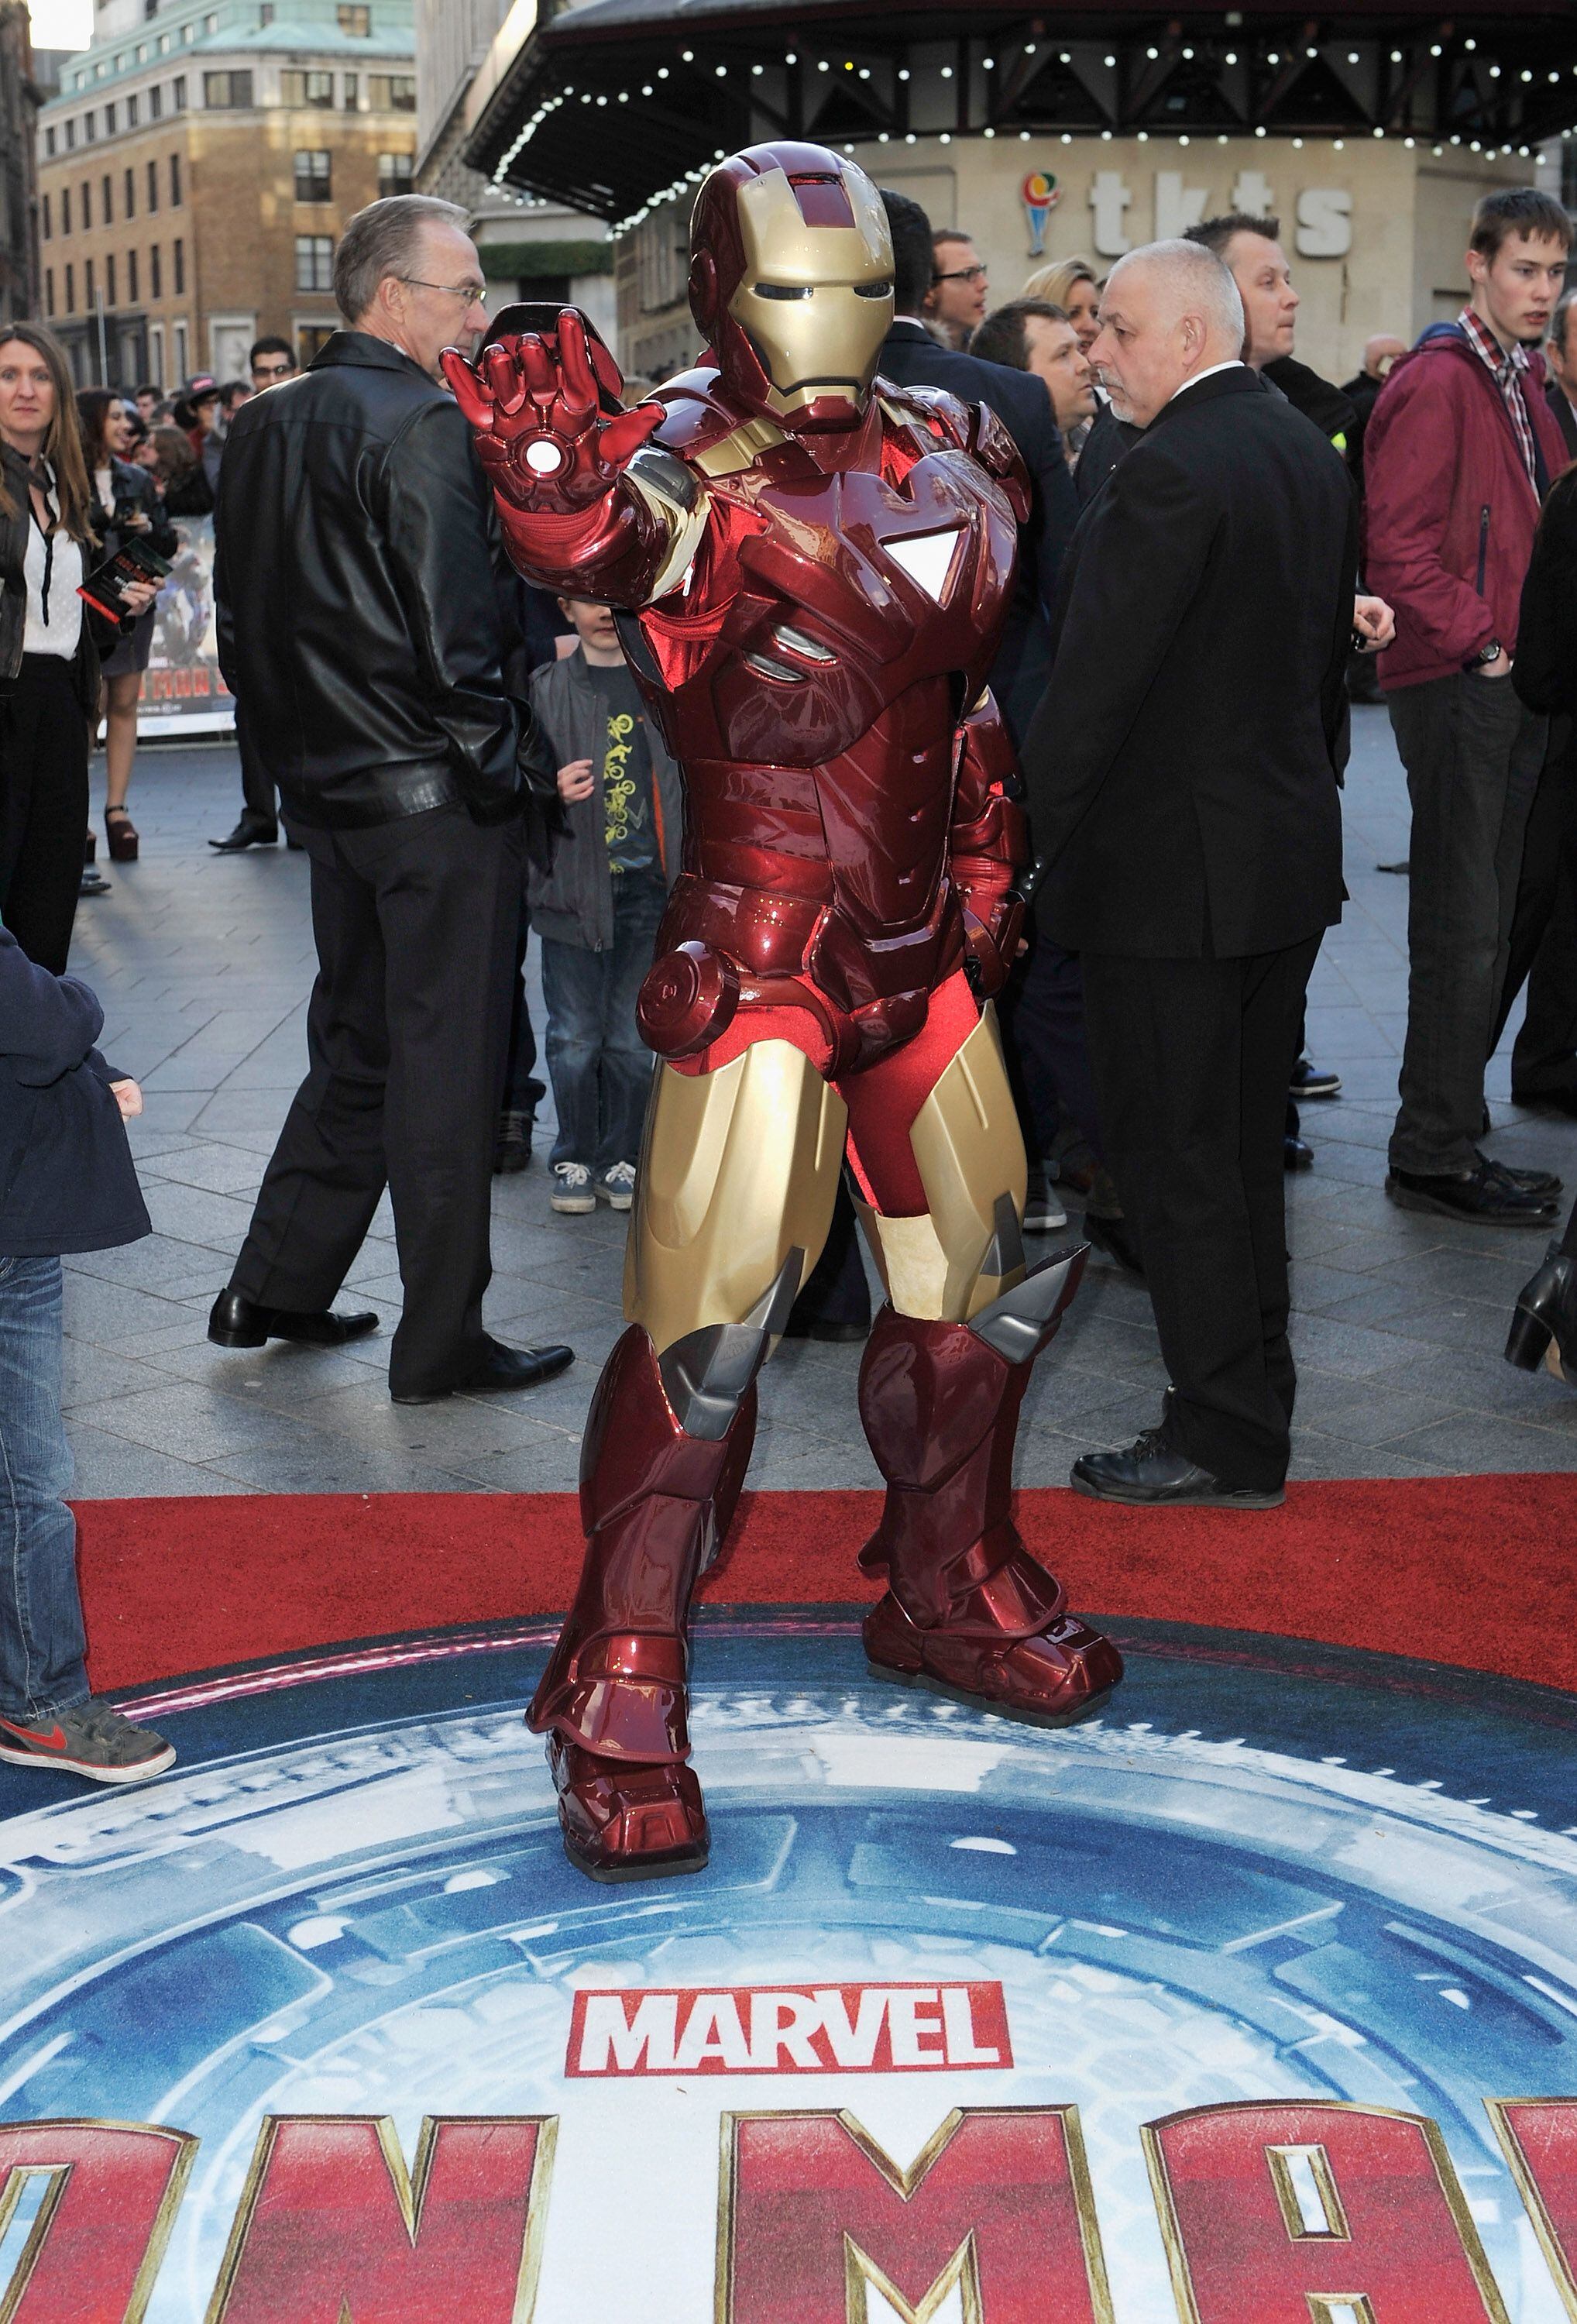 Iron Man like Jet Suit available for humans to buy - The Washington Post